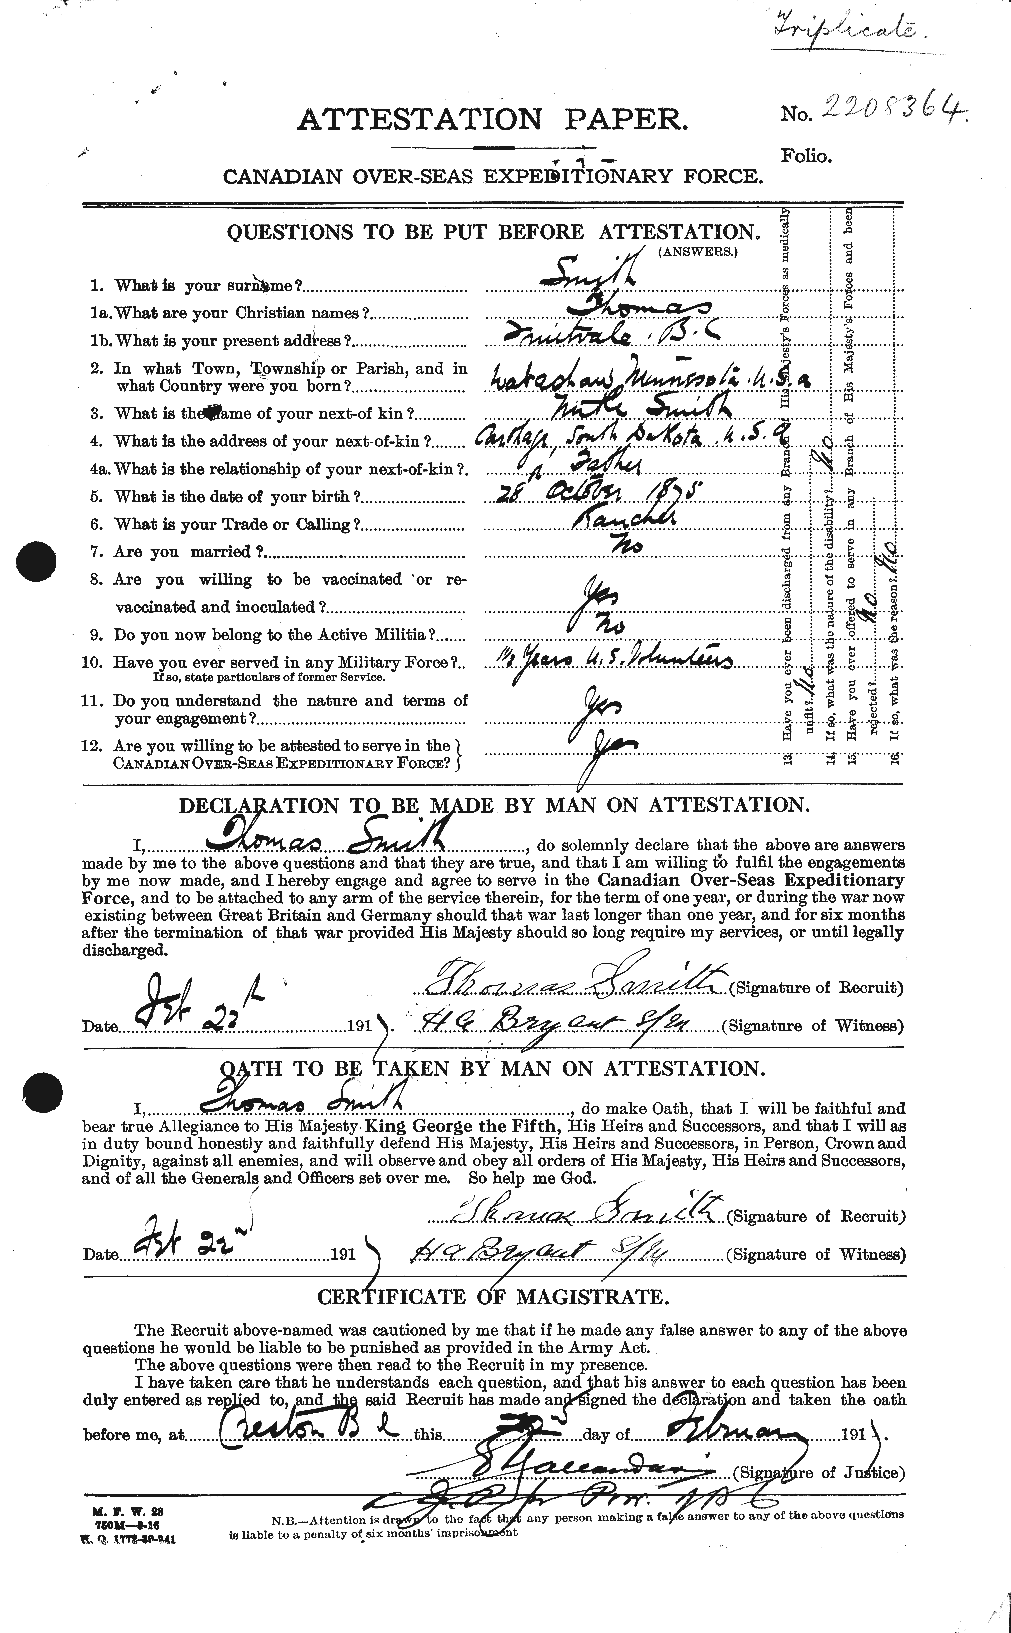 Personnel Records of the First World War - CEF 106678a